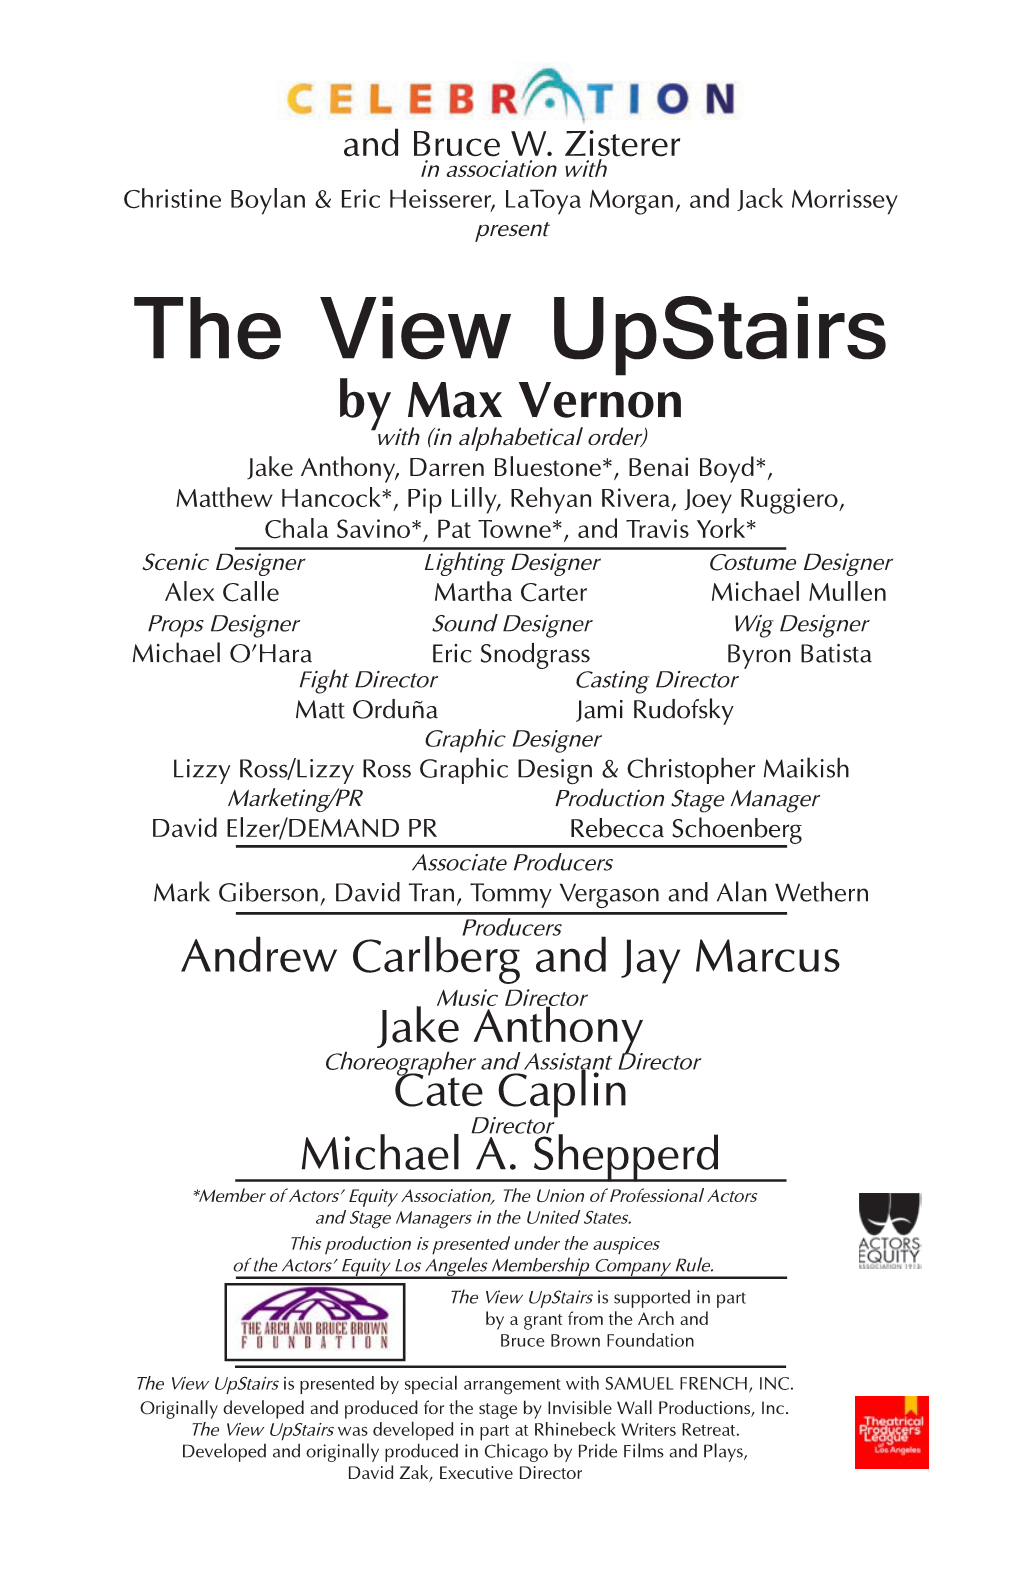 The View Upstairs Is Supported in Part by a Grant from the Arch and Bruce Brown Foundation